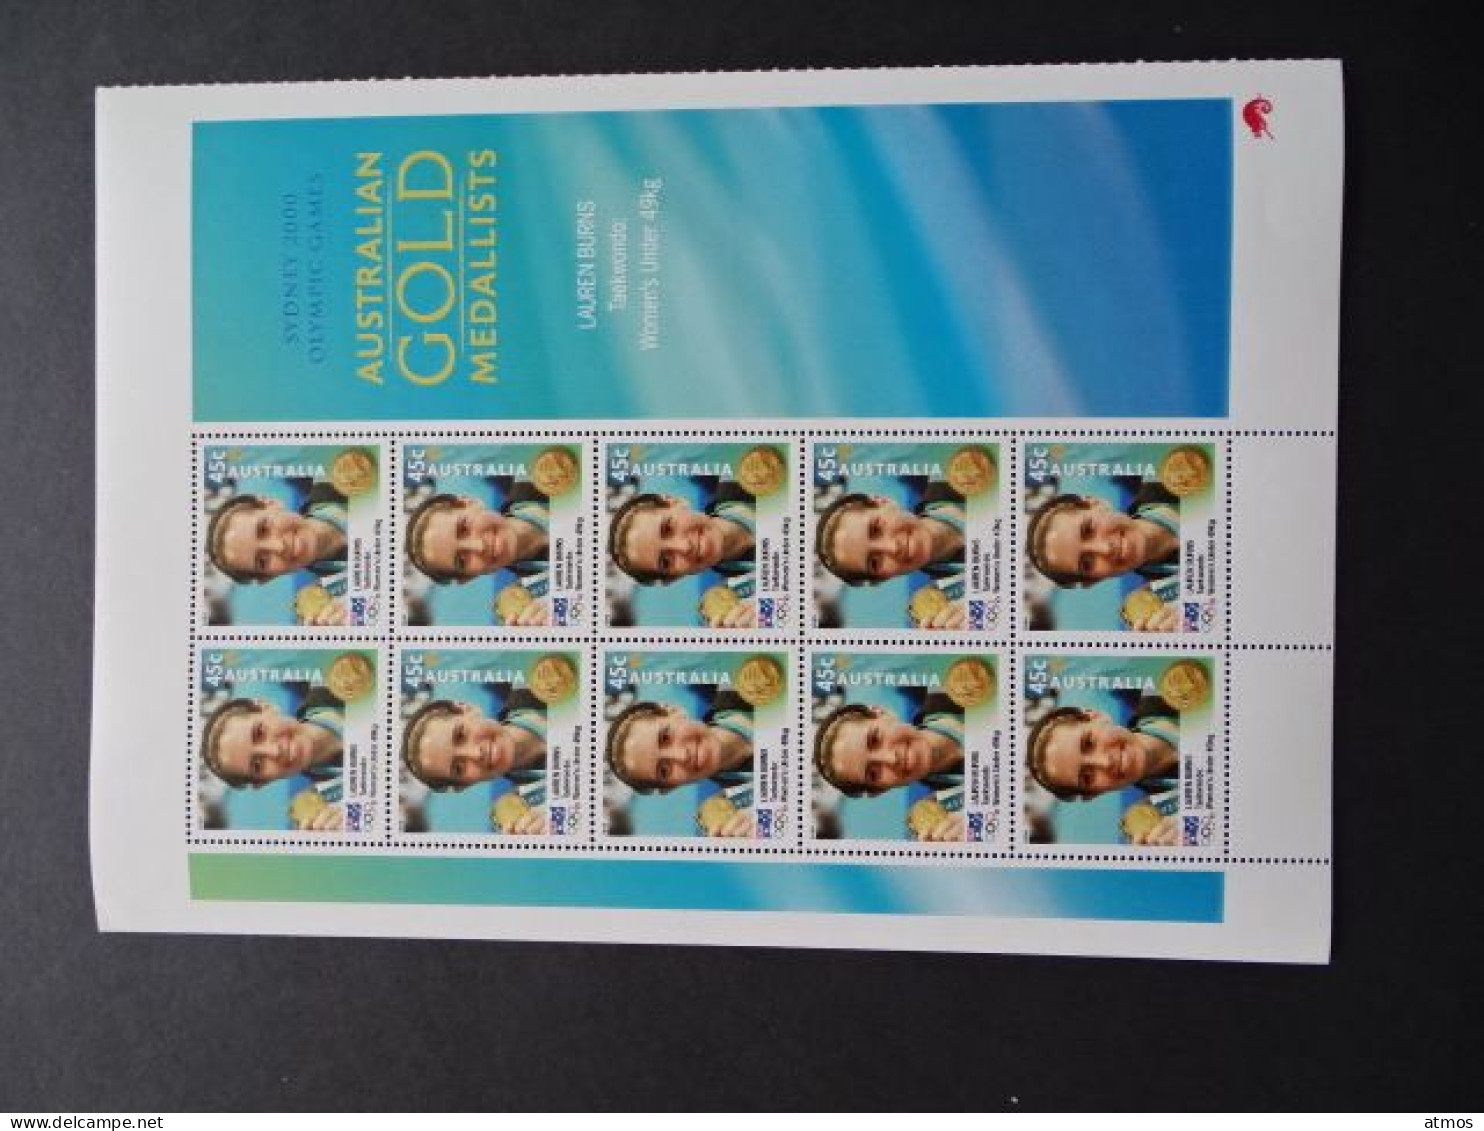 Australia MNH Michel Nr 1985 Sheet Of 10 From 2000 VIC - Mint Stamps